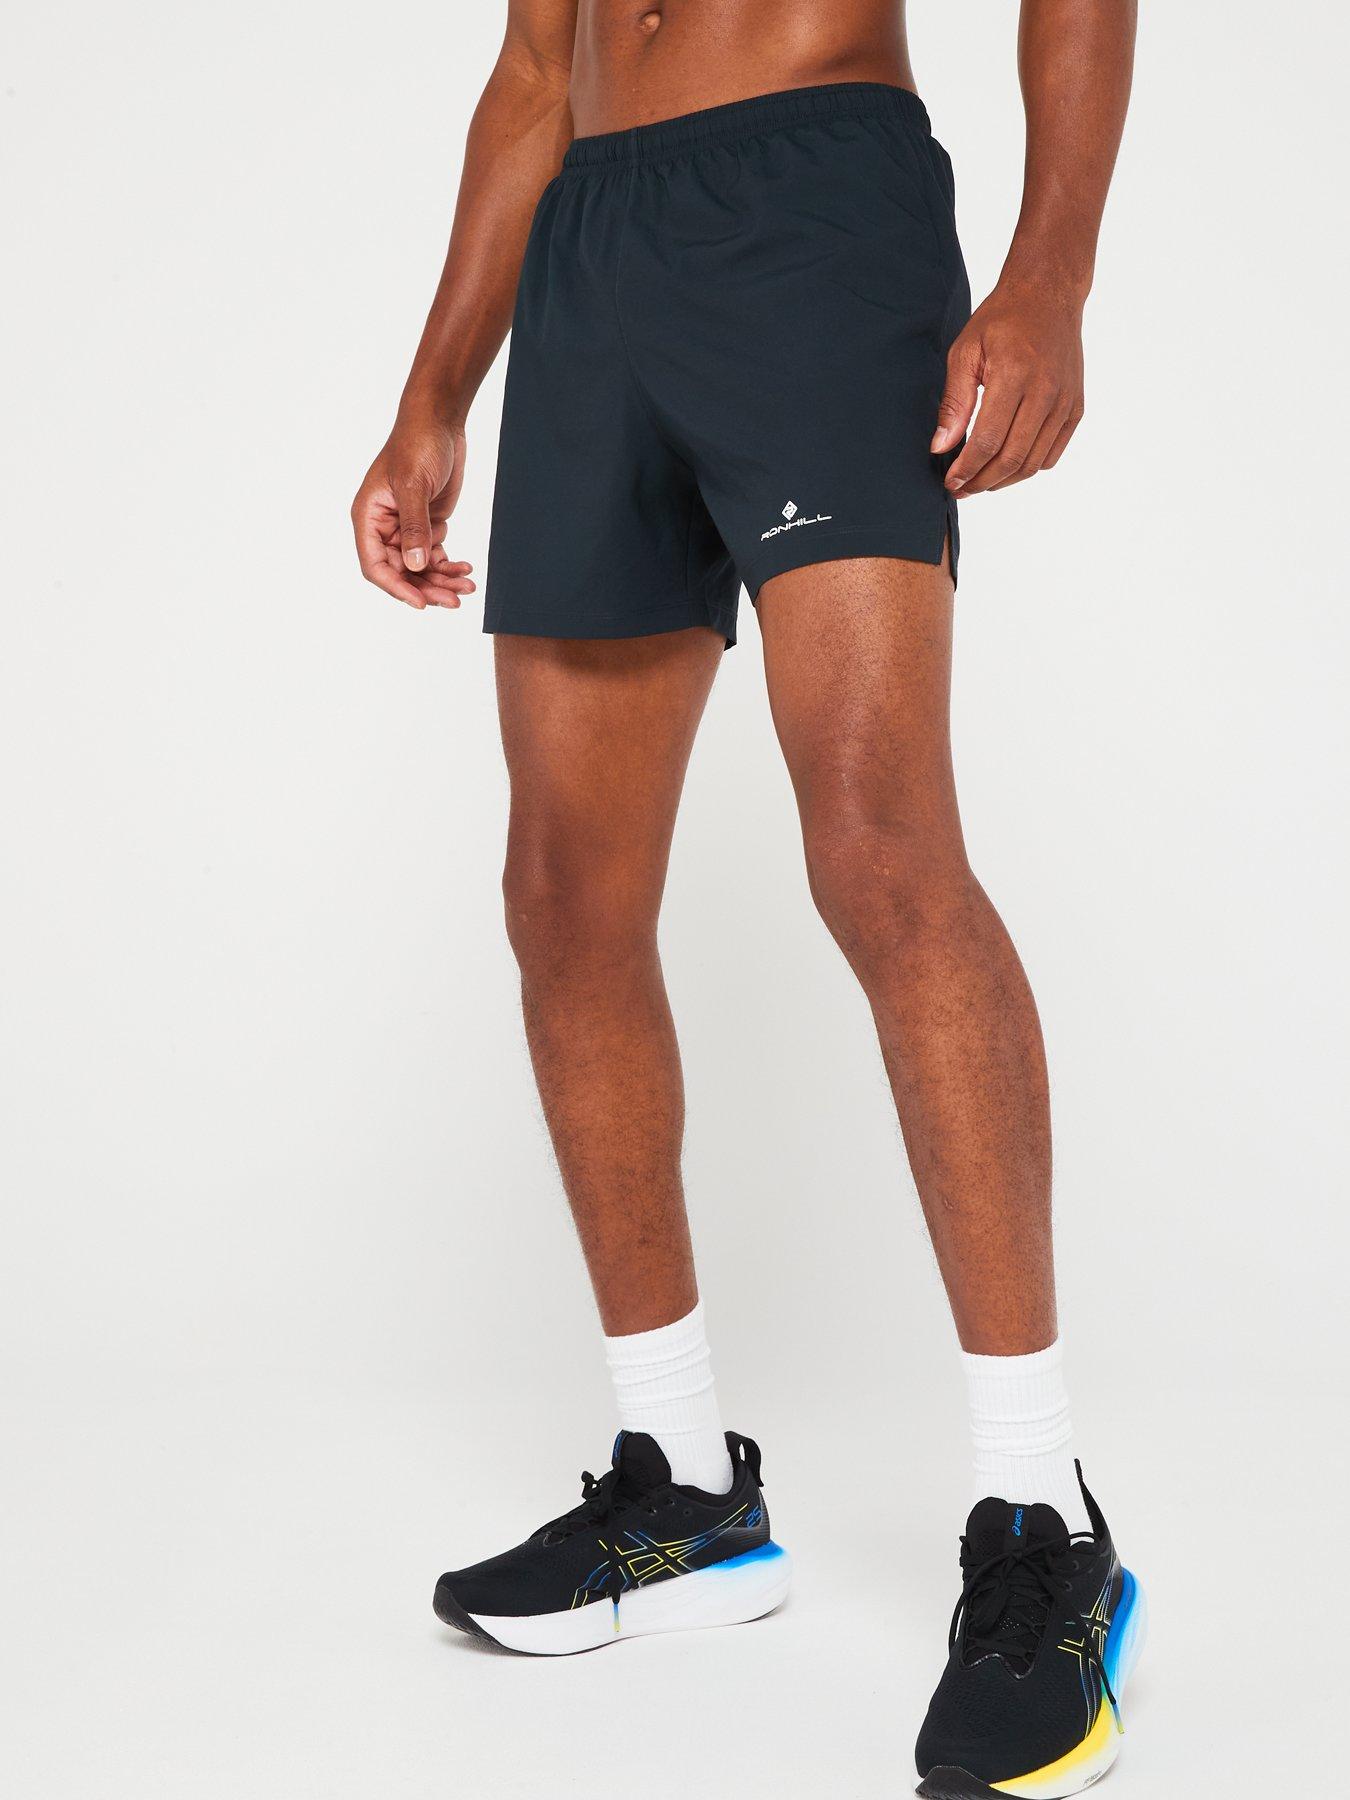 Latest Offers, Running, Mens sports clothing, Sports & leisure